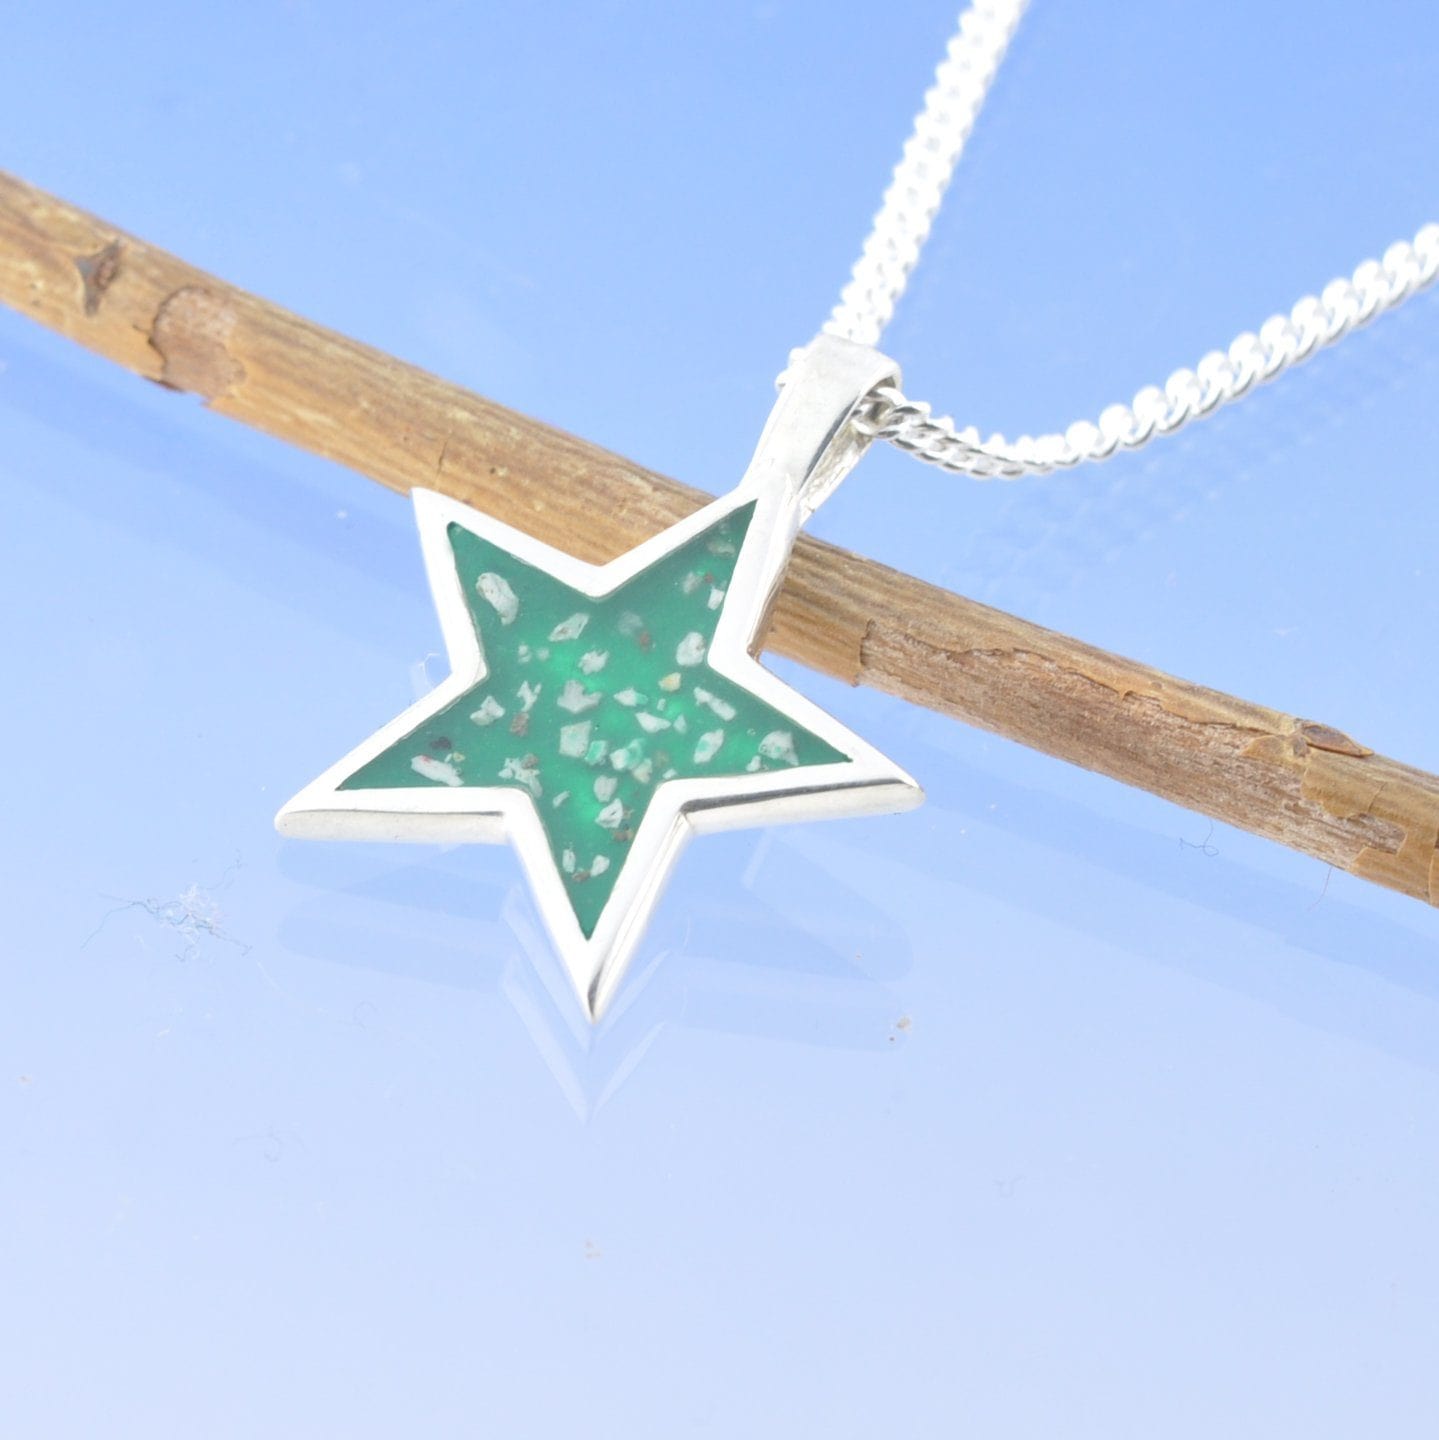 Cremation Ash Necklace - Solid Star 20mm Pendant by Chris Parry Jewellery